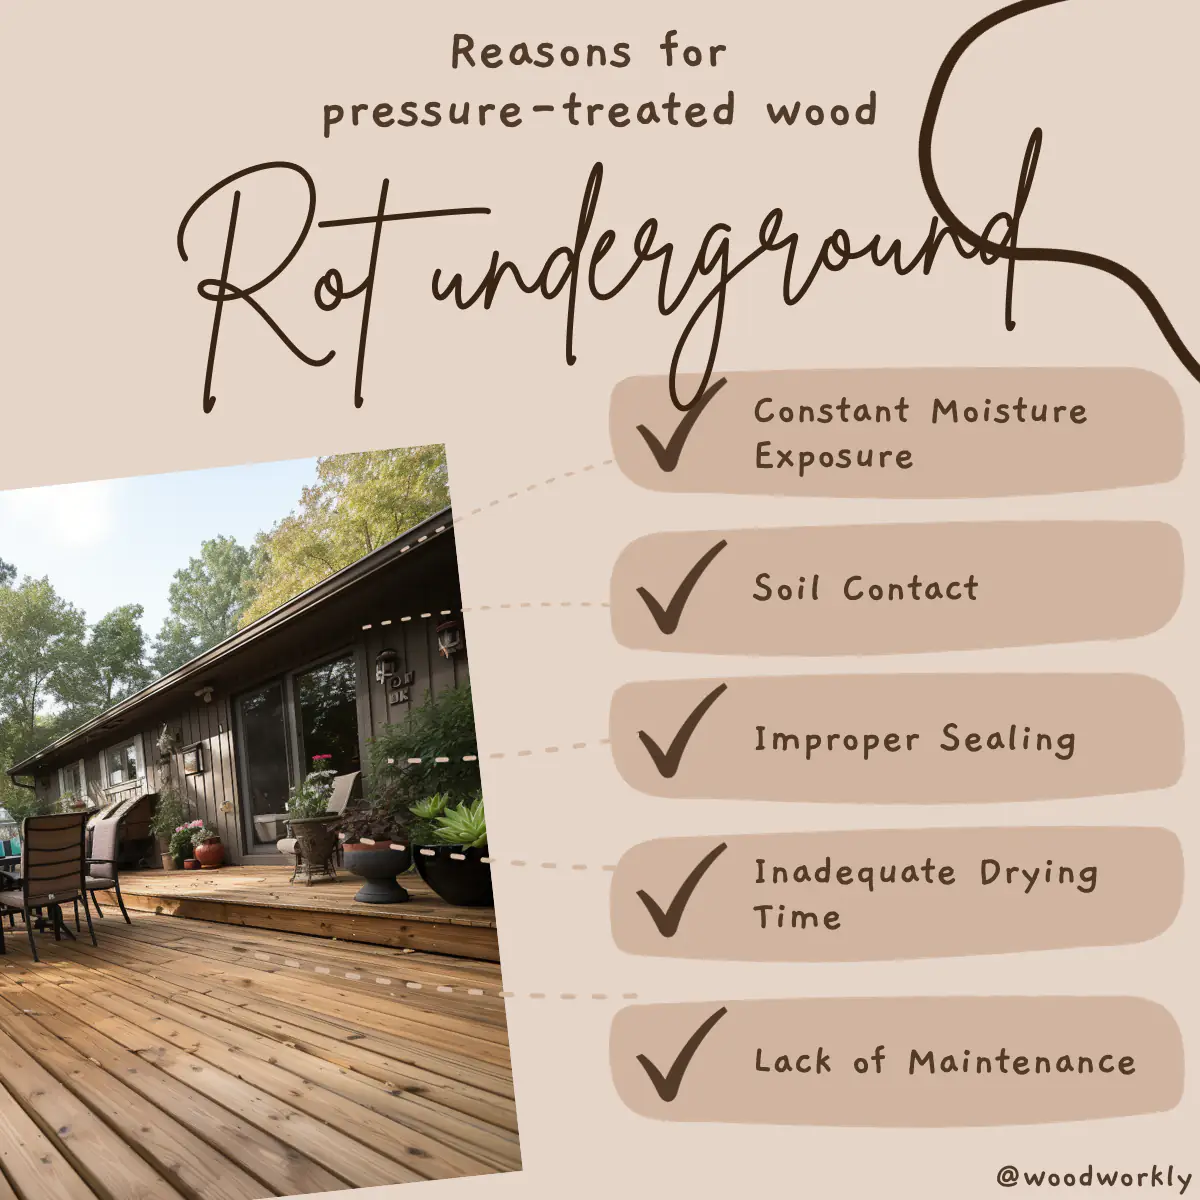 Reasons for pressure-treated wood rot underground